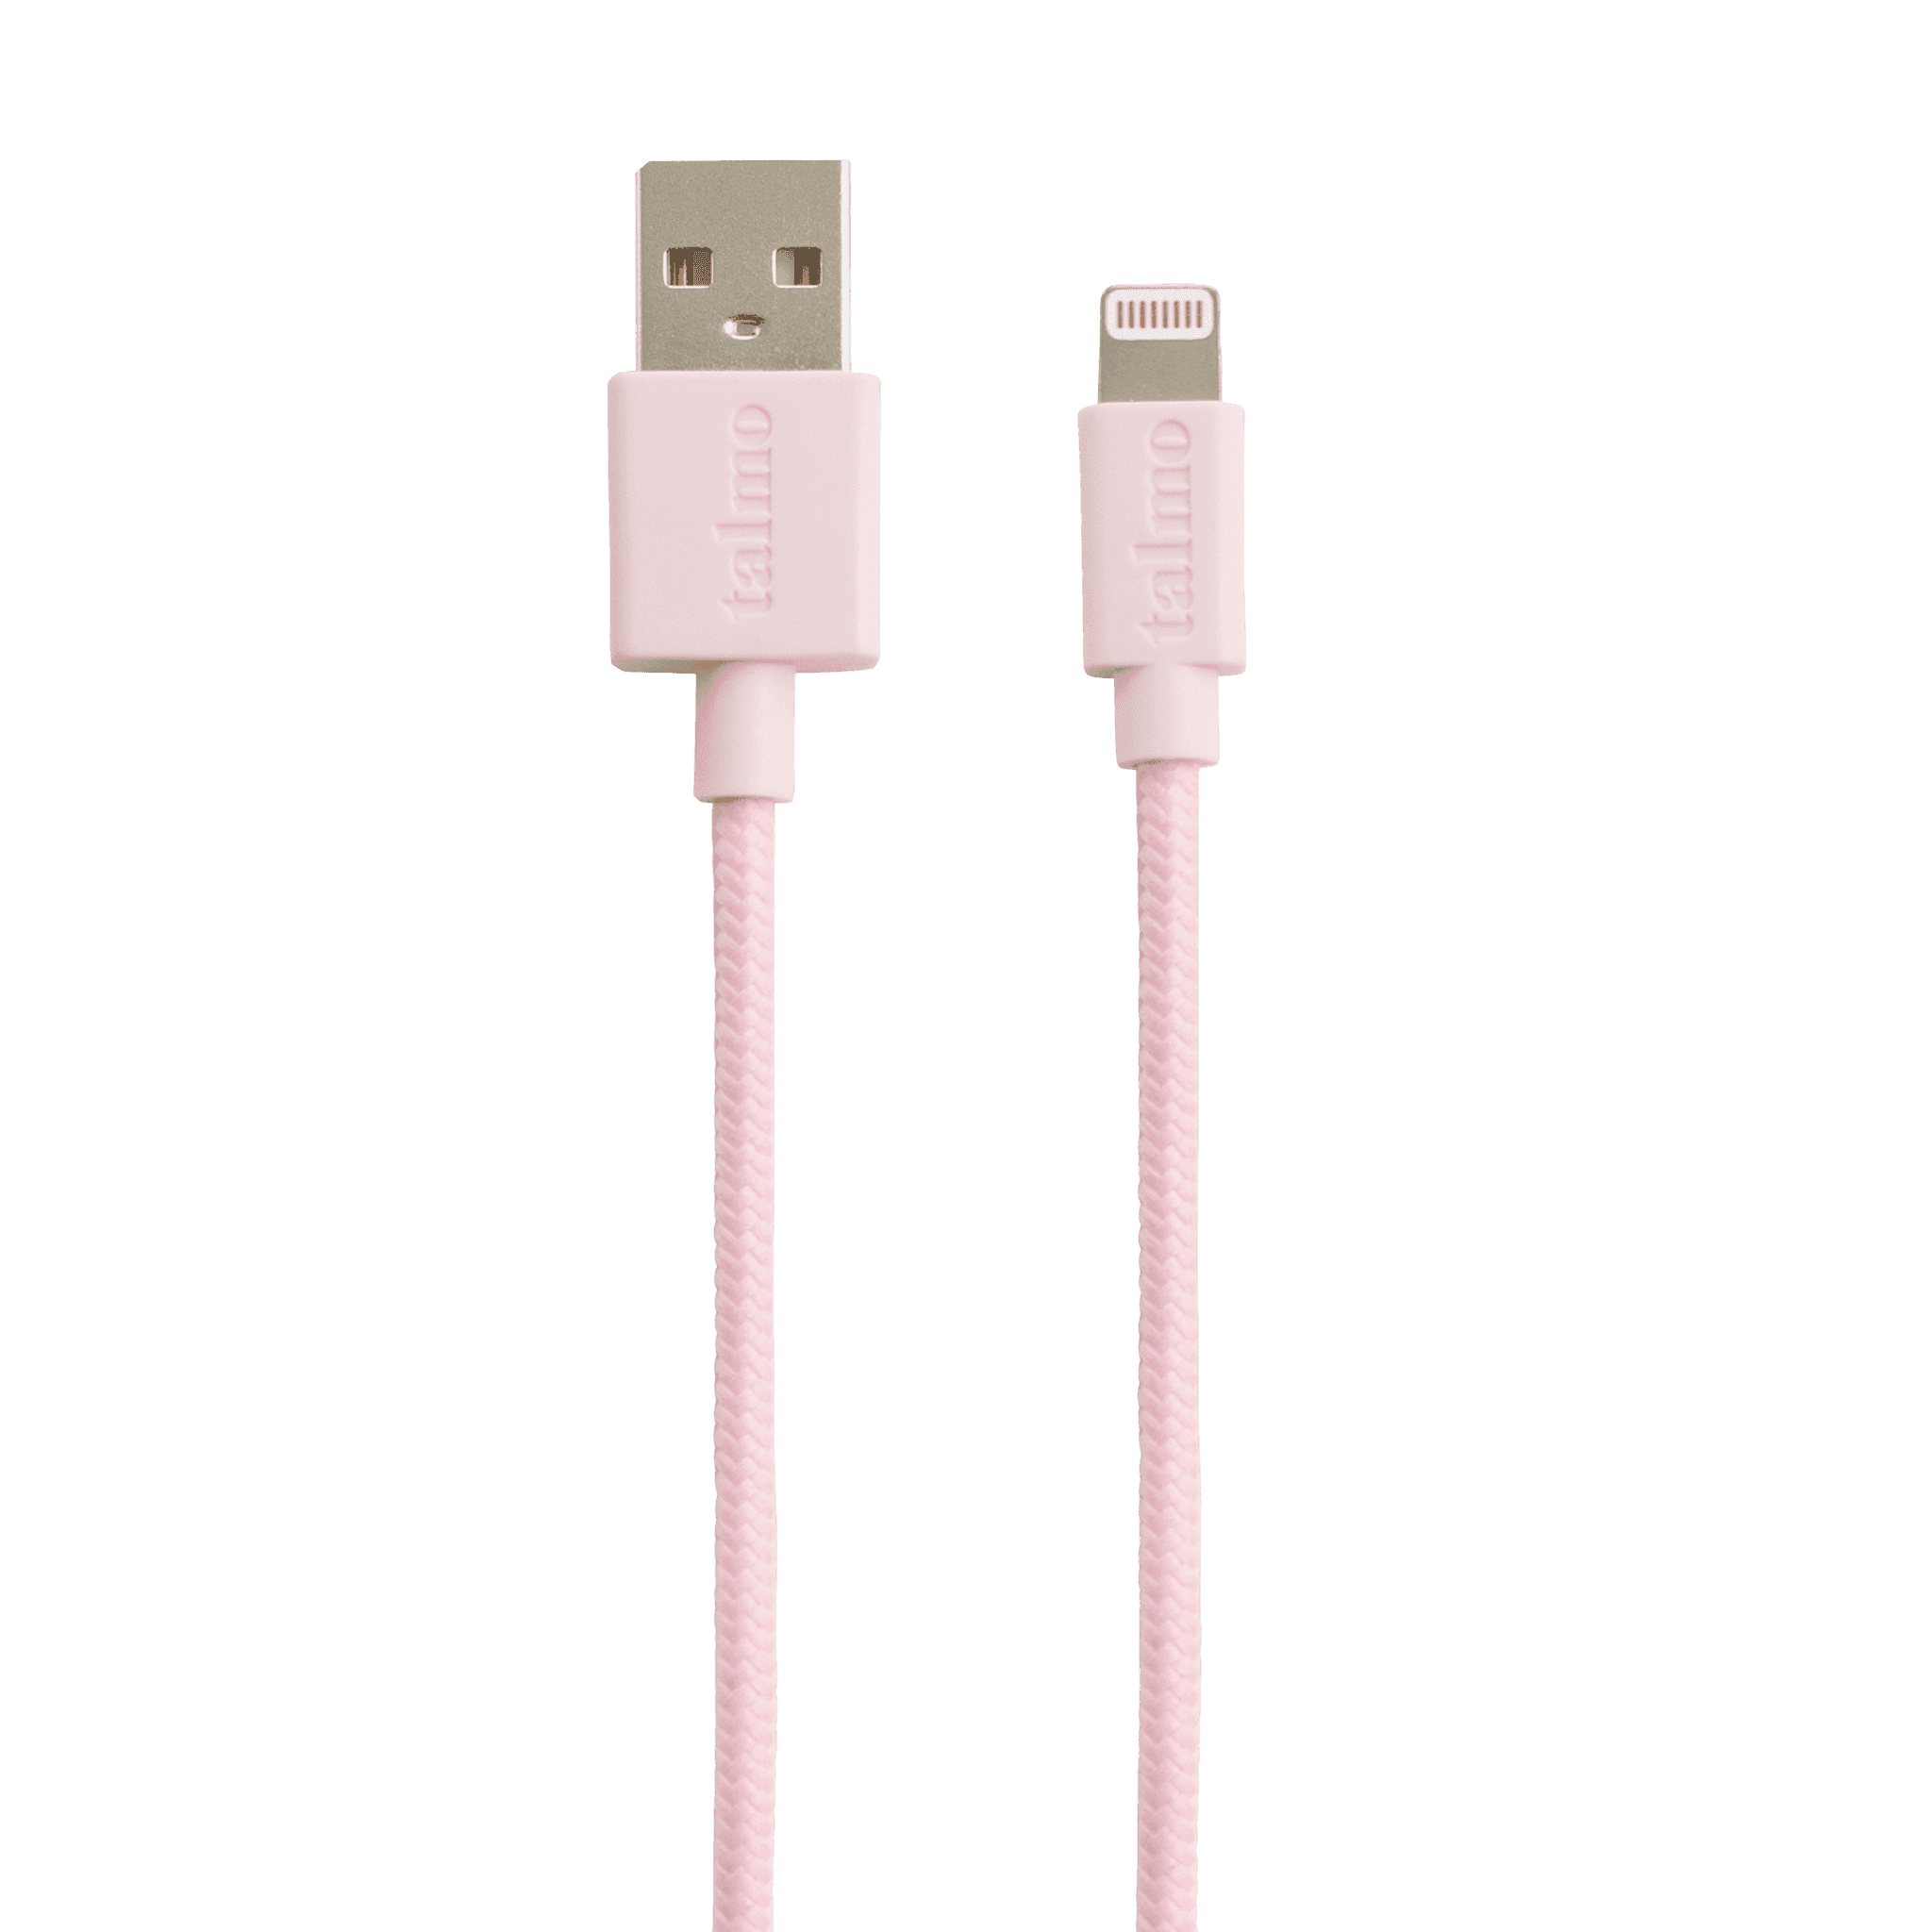 iPhone Cable in Bubblegum Pink